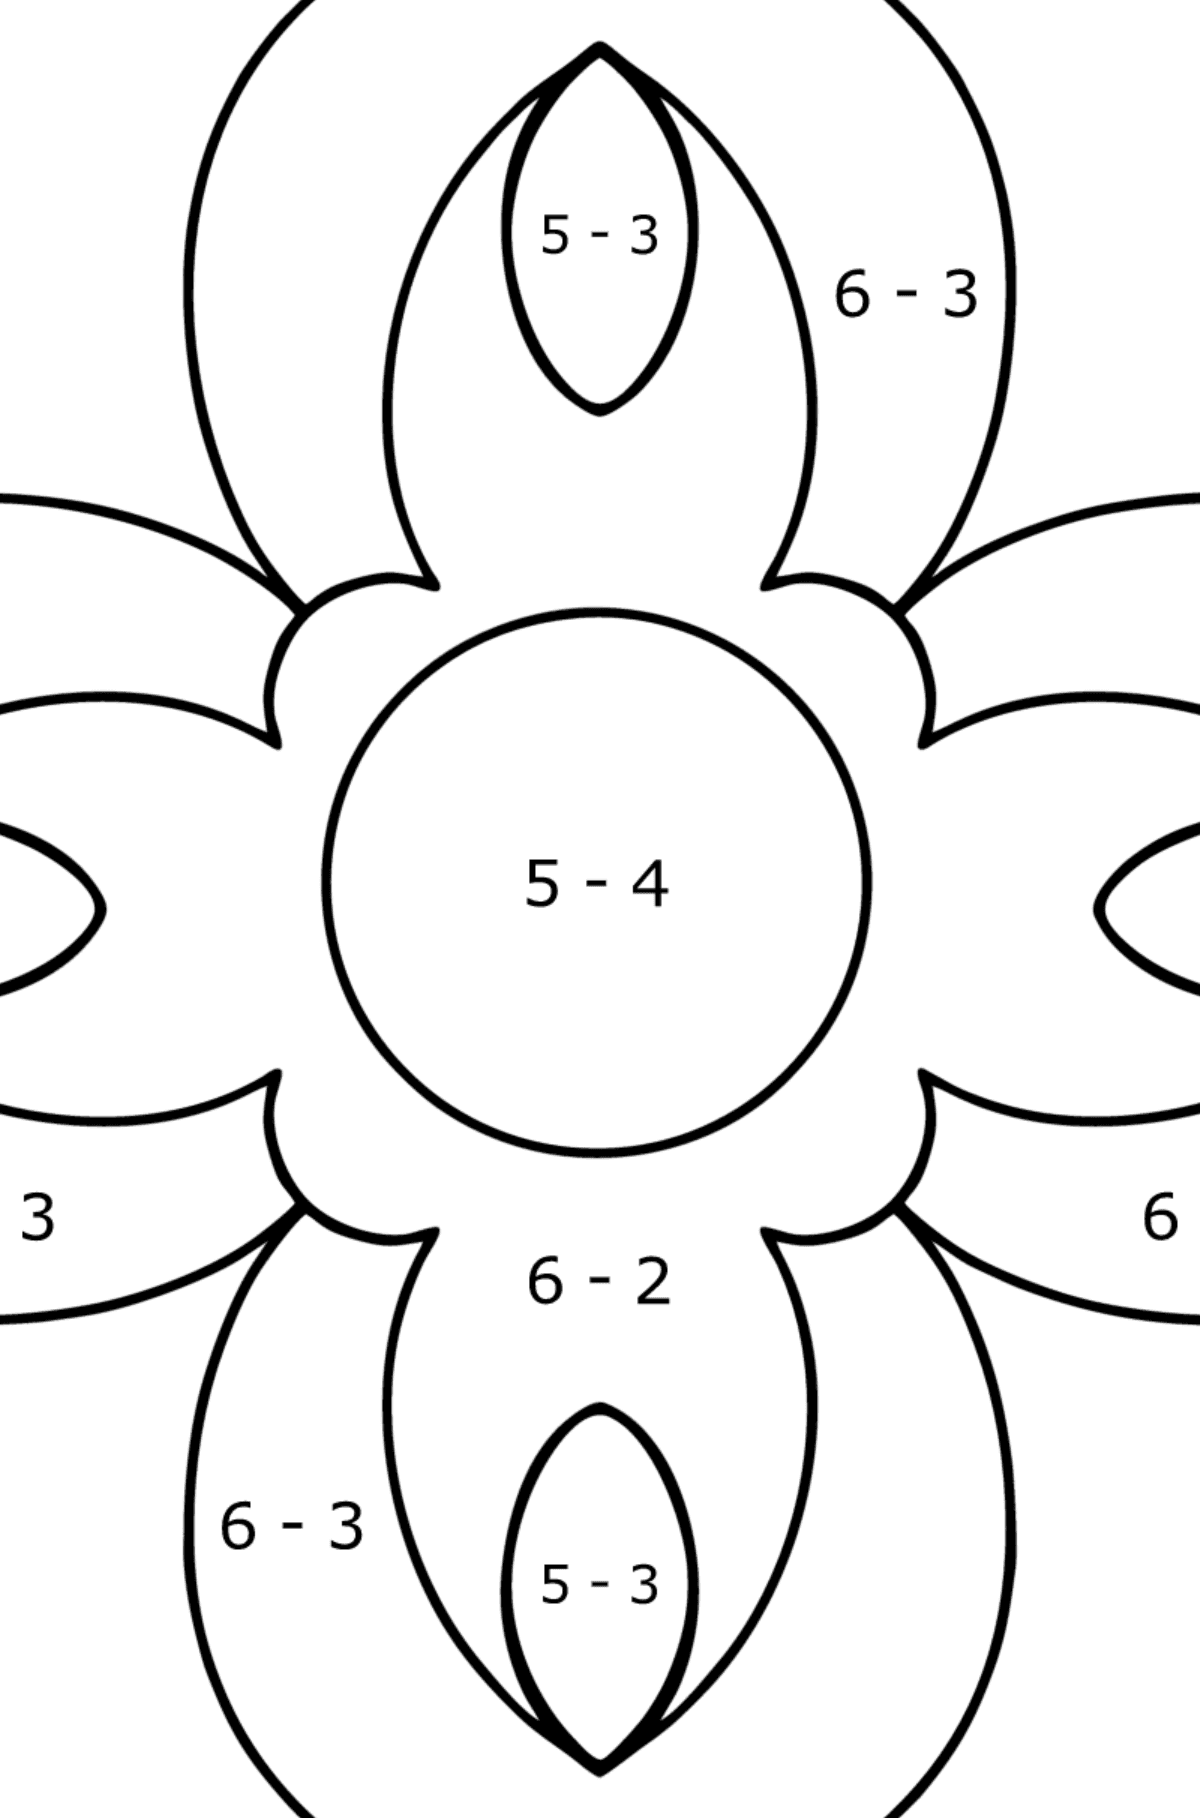 Coloring book for kids - Anti stress flower - Math Coloring - Subtraction for Kids